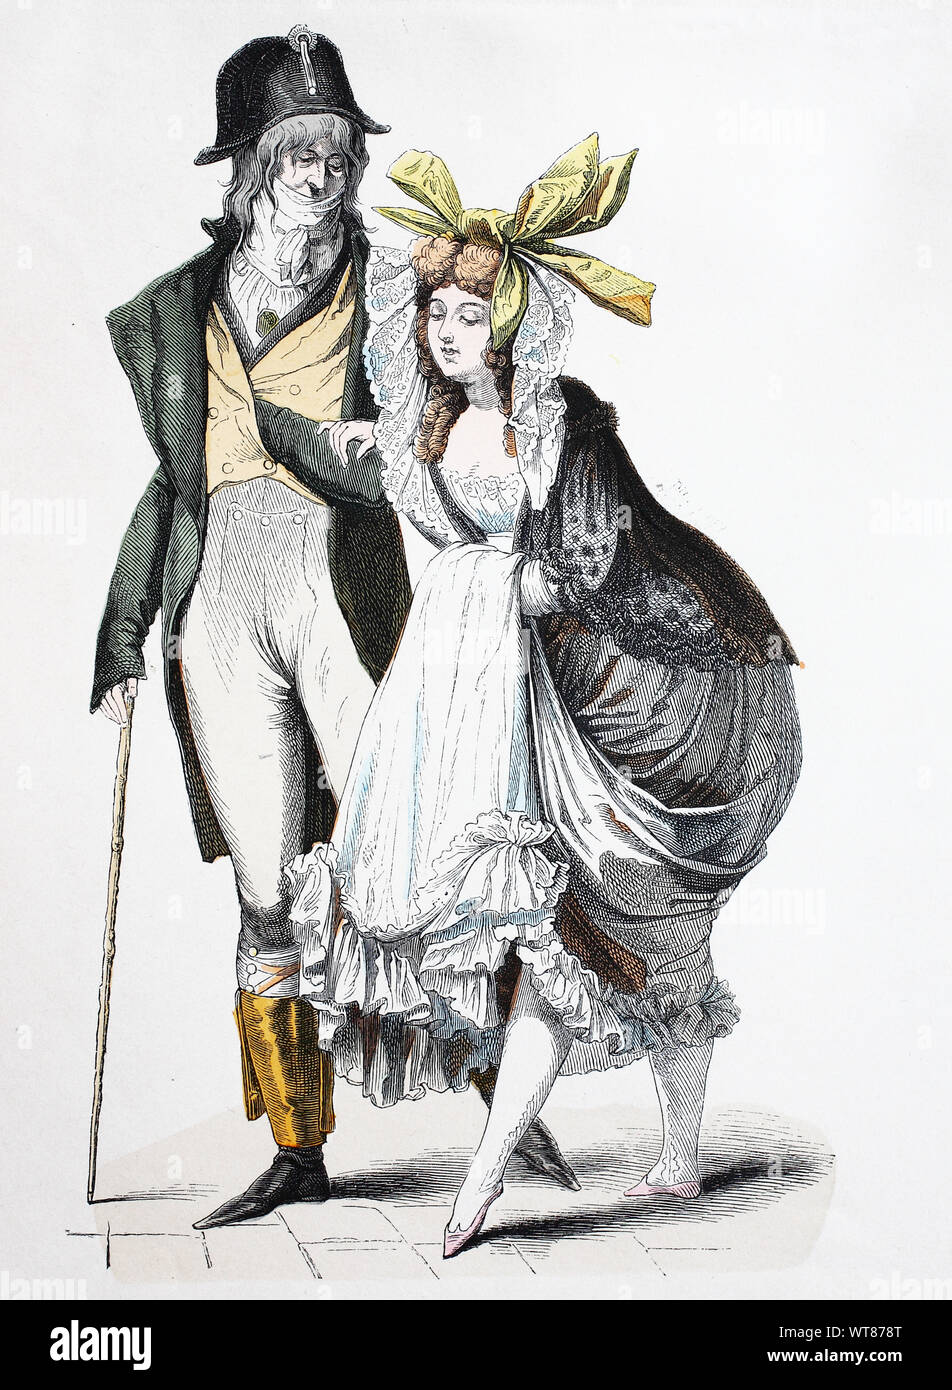 National costume, clothes, history of the costumes, French Incroyables, in 1794, Volkstracht, Kleidung, Geschichte der Kostüme, französische Incroyables, 1794 Stock Photo